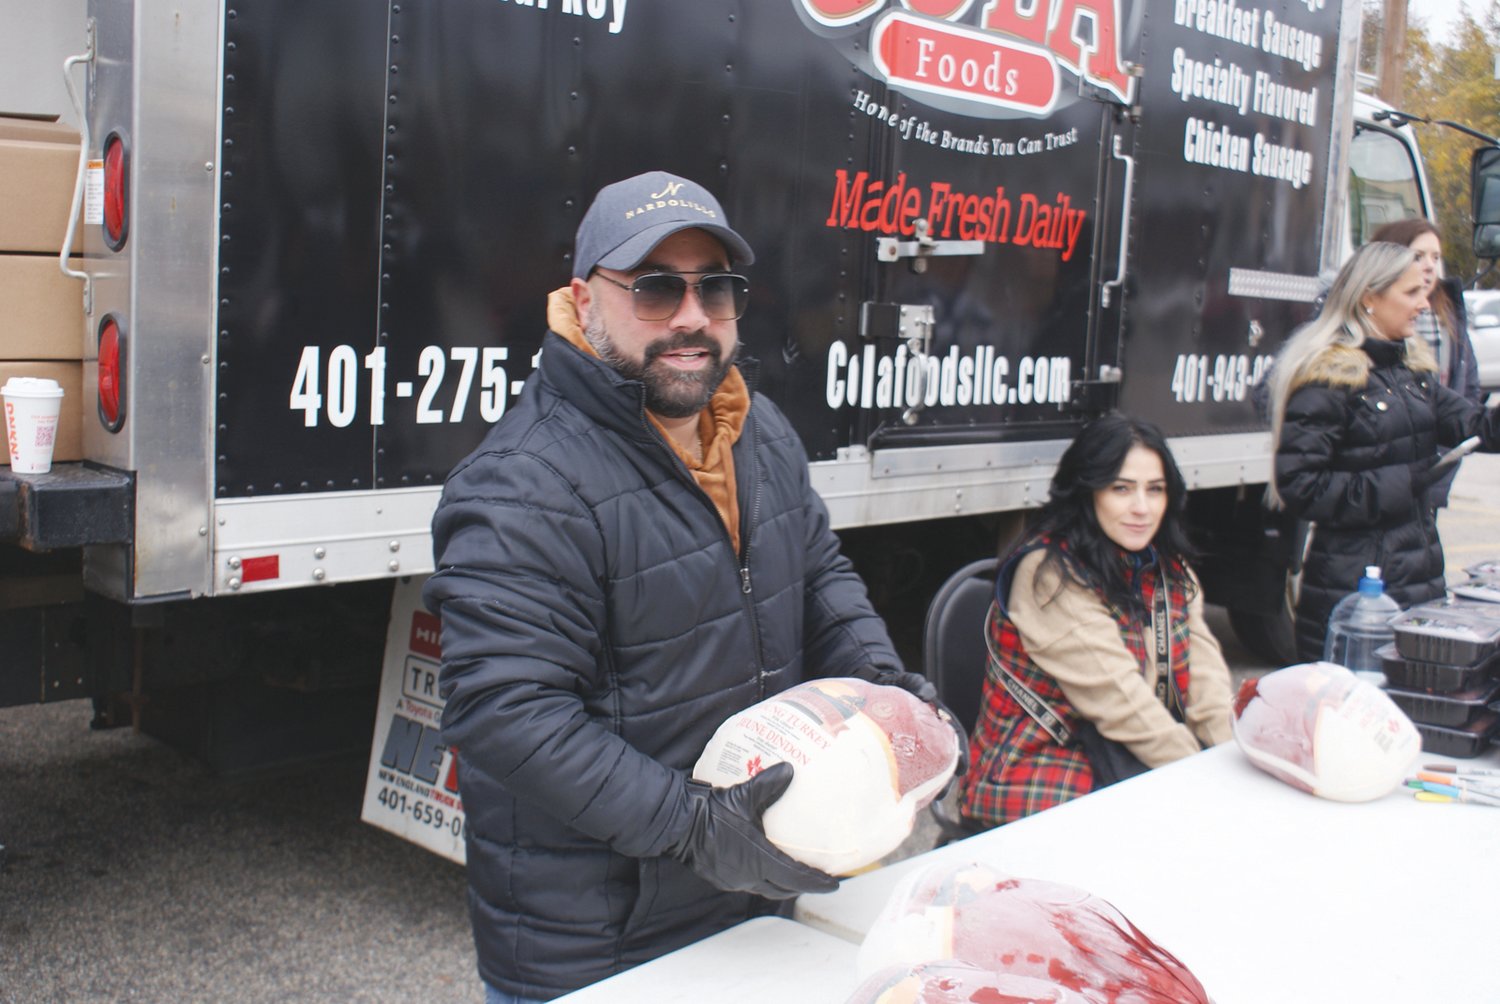 VOLUNTEER: Volunteering at the Free Turkey at the St. Mary’s Feast Society was Ann Marie Harty along with Ryan Nardolillo.